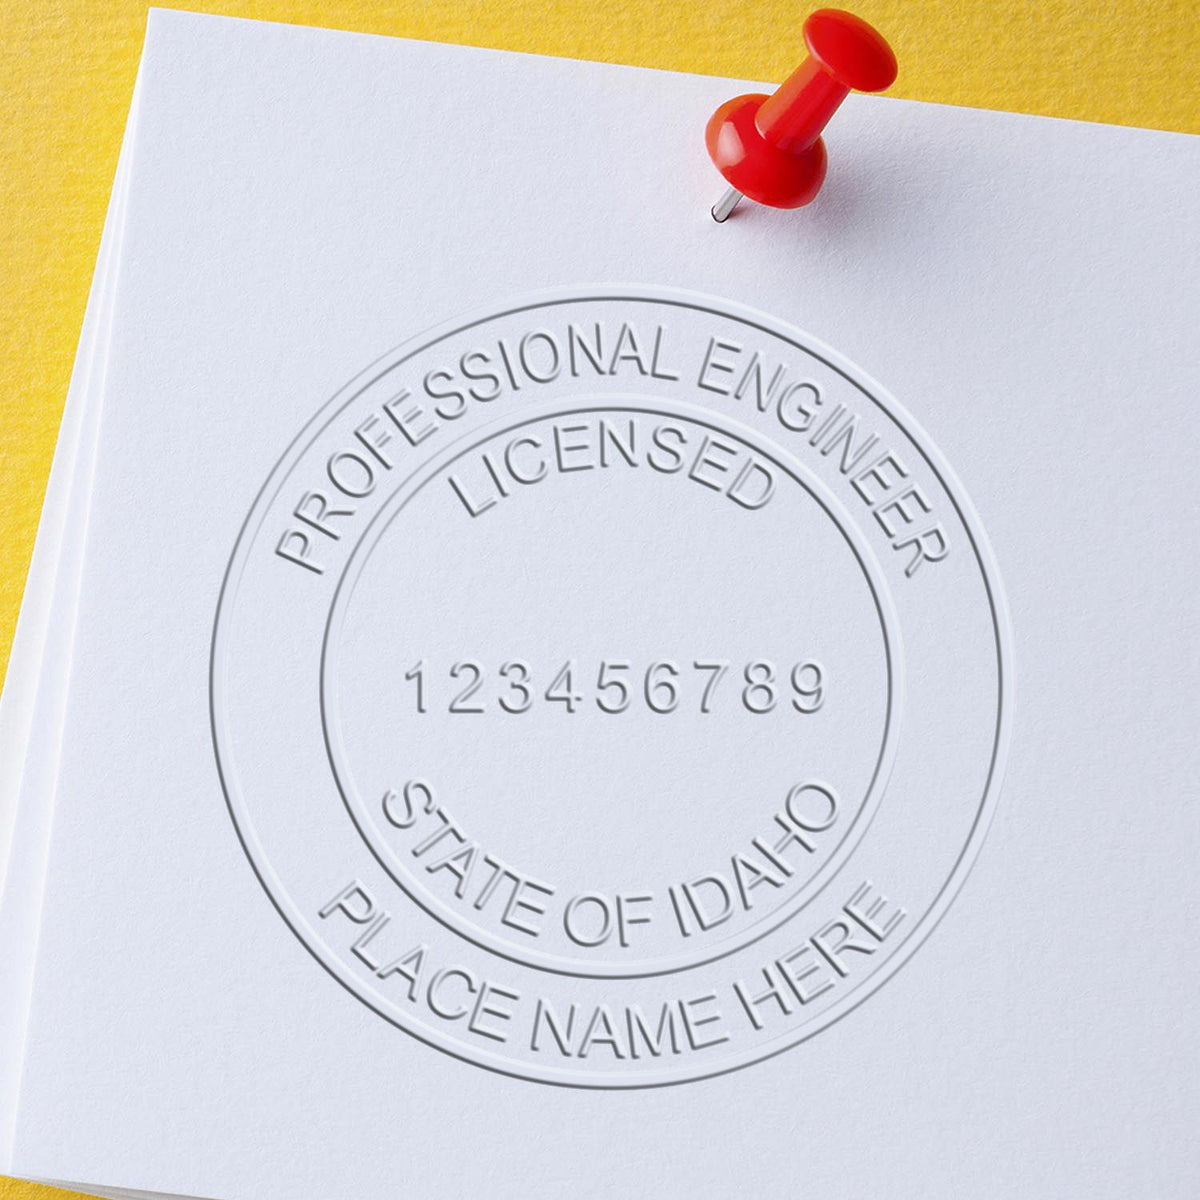 An alternative view of the Heavy Duty Cast Iron Idaho Engineer Seal Embosser stamped on a sheet of paper showing the image in use